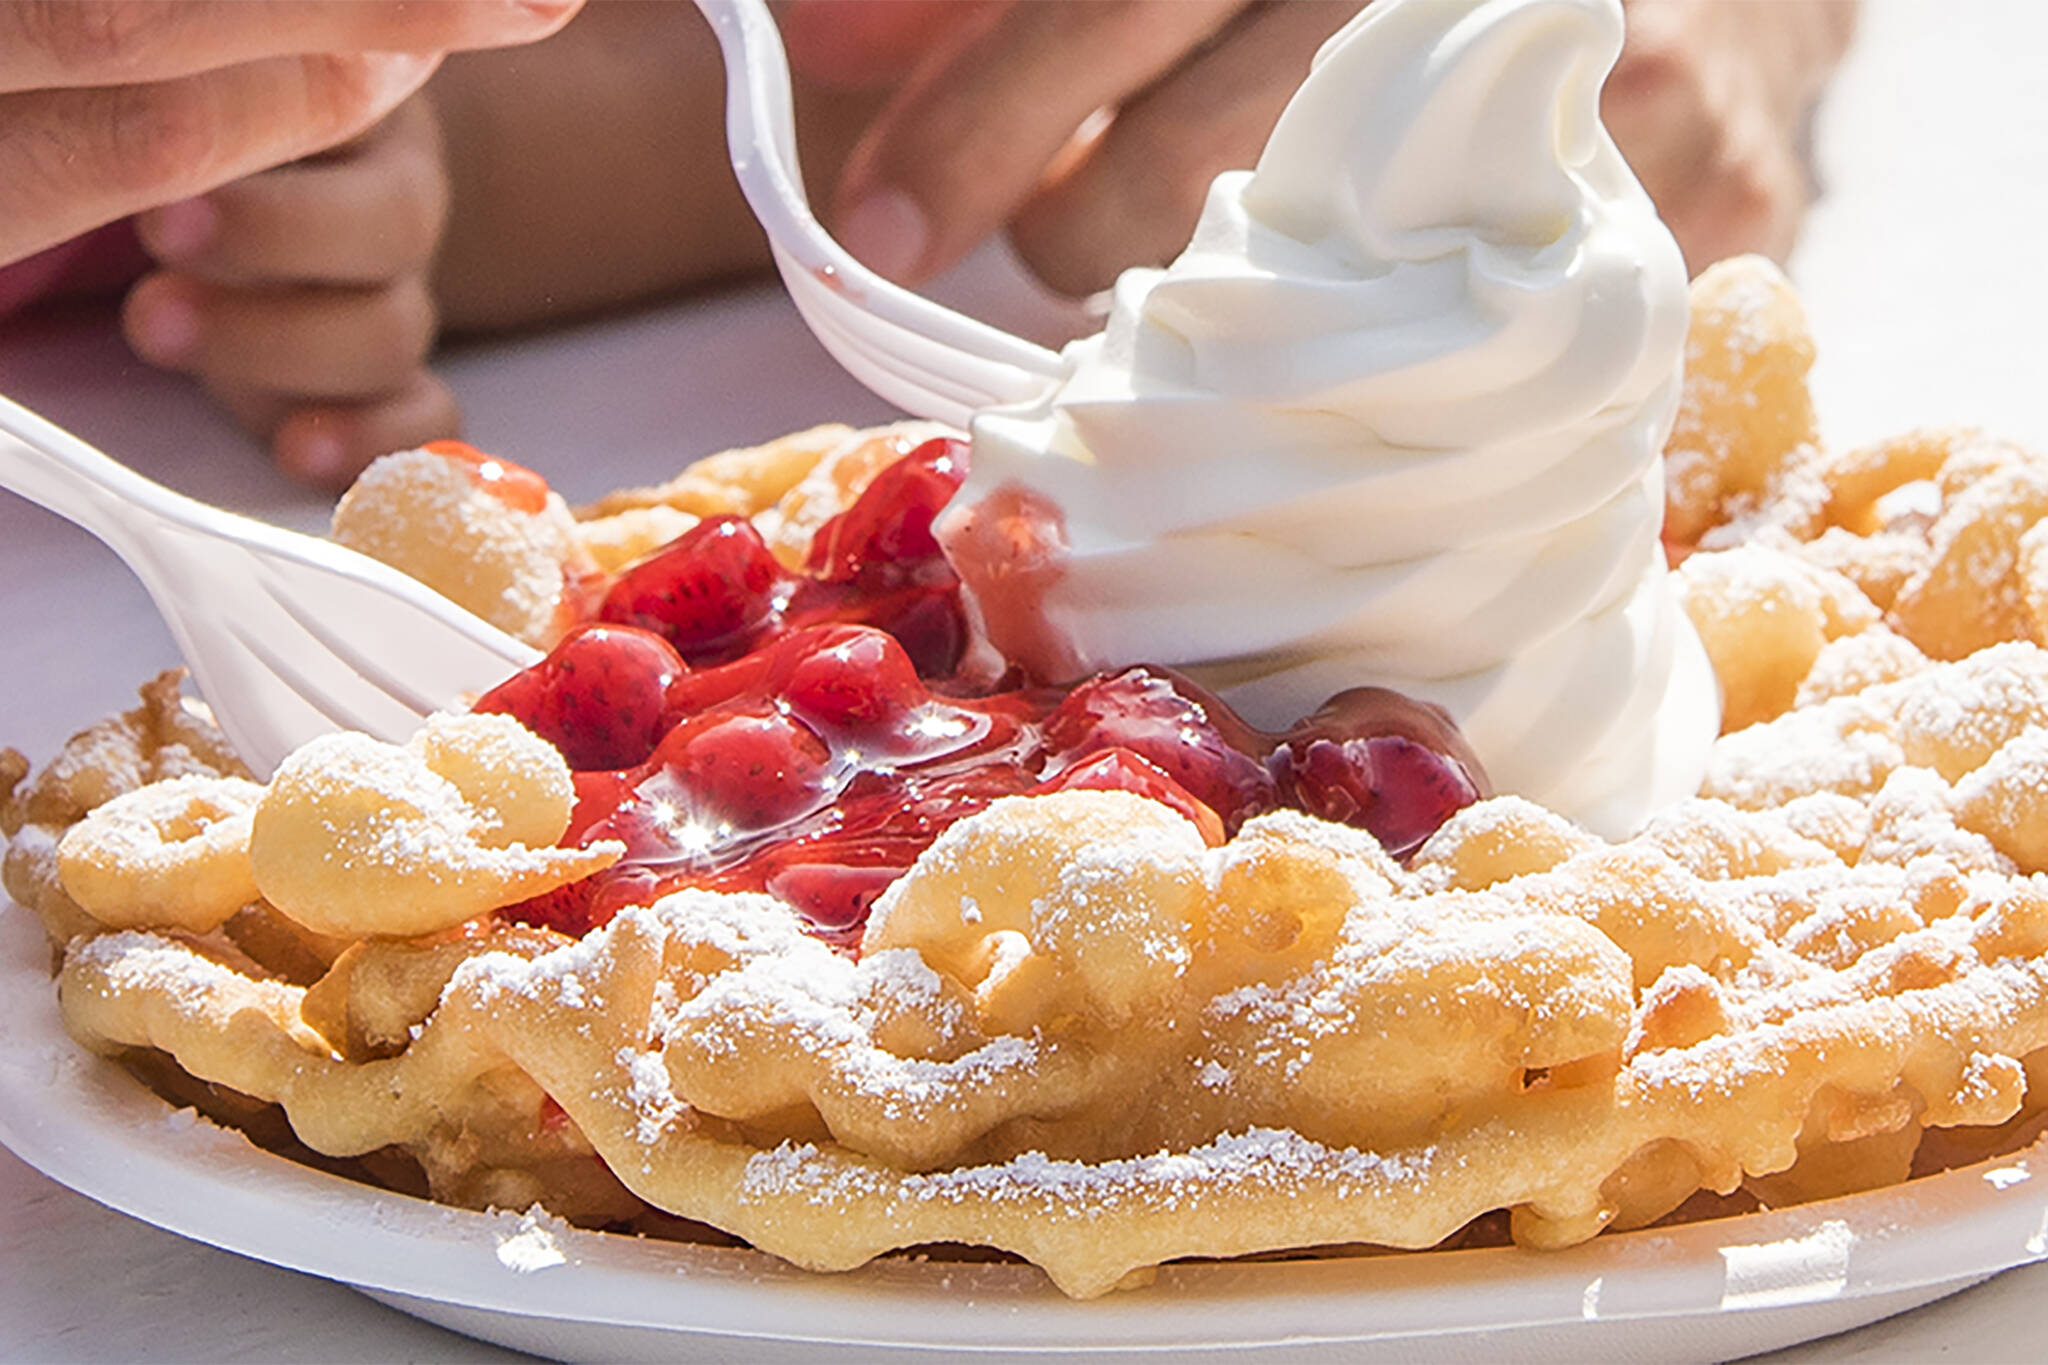 Canada’s Wonderland just released the secret recipe for their famous funnel cake